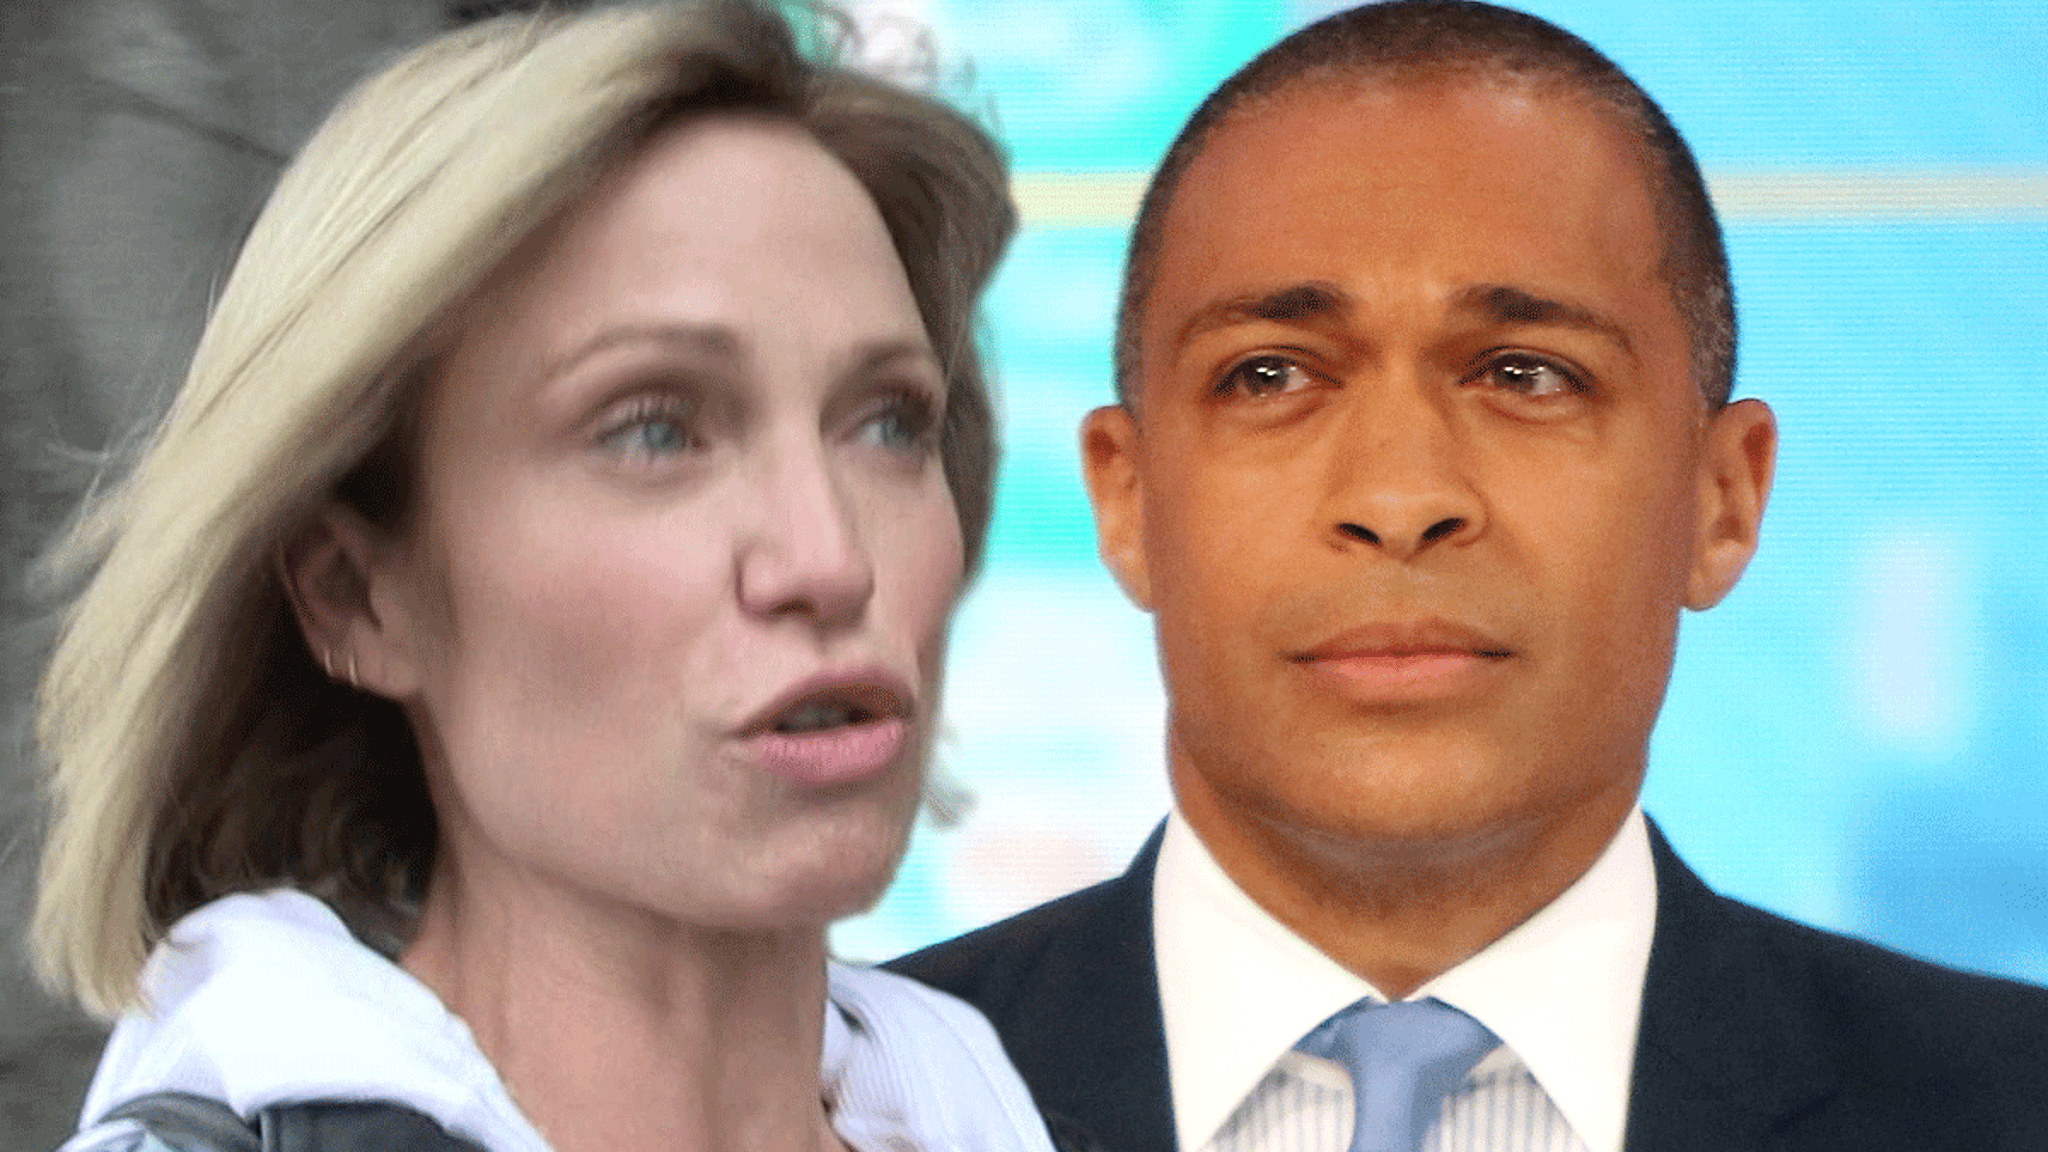 'GMA3' Anchors Amy Robach and T.J. Holmes Taken Off Air After Relationship Revea..